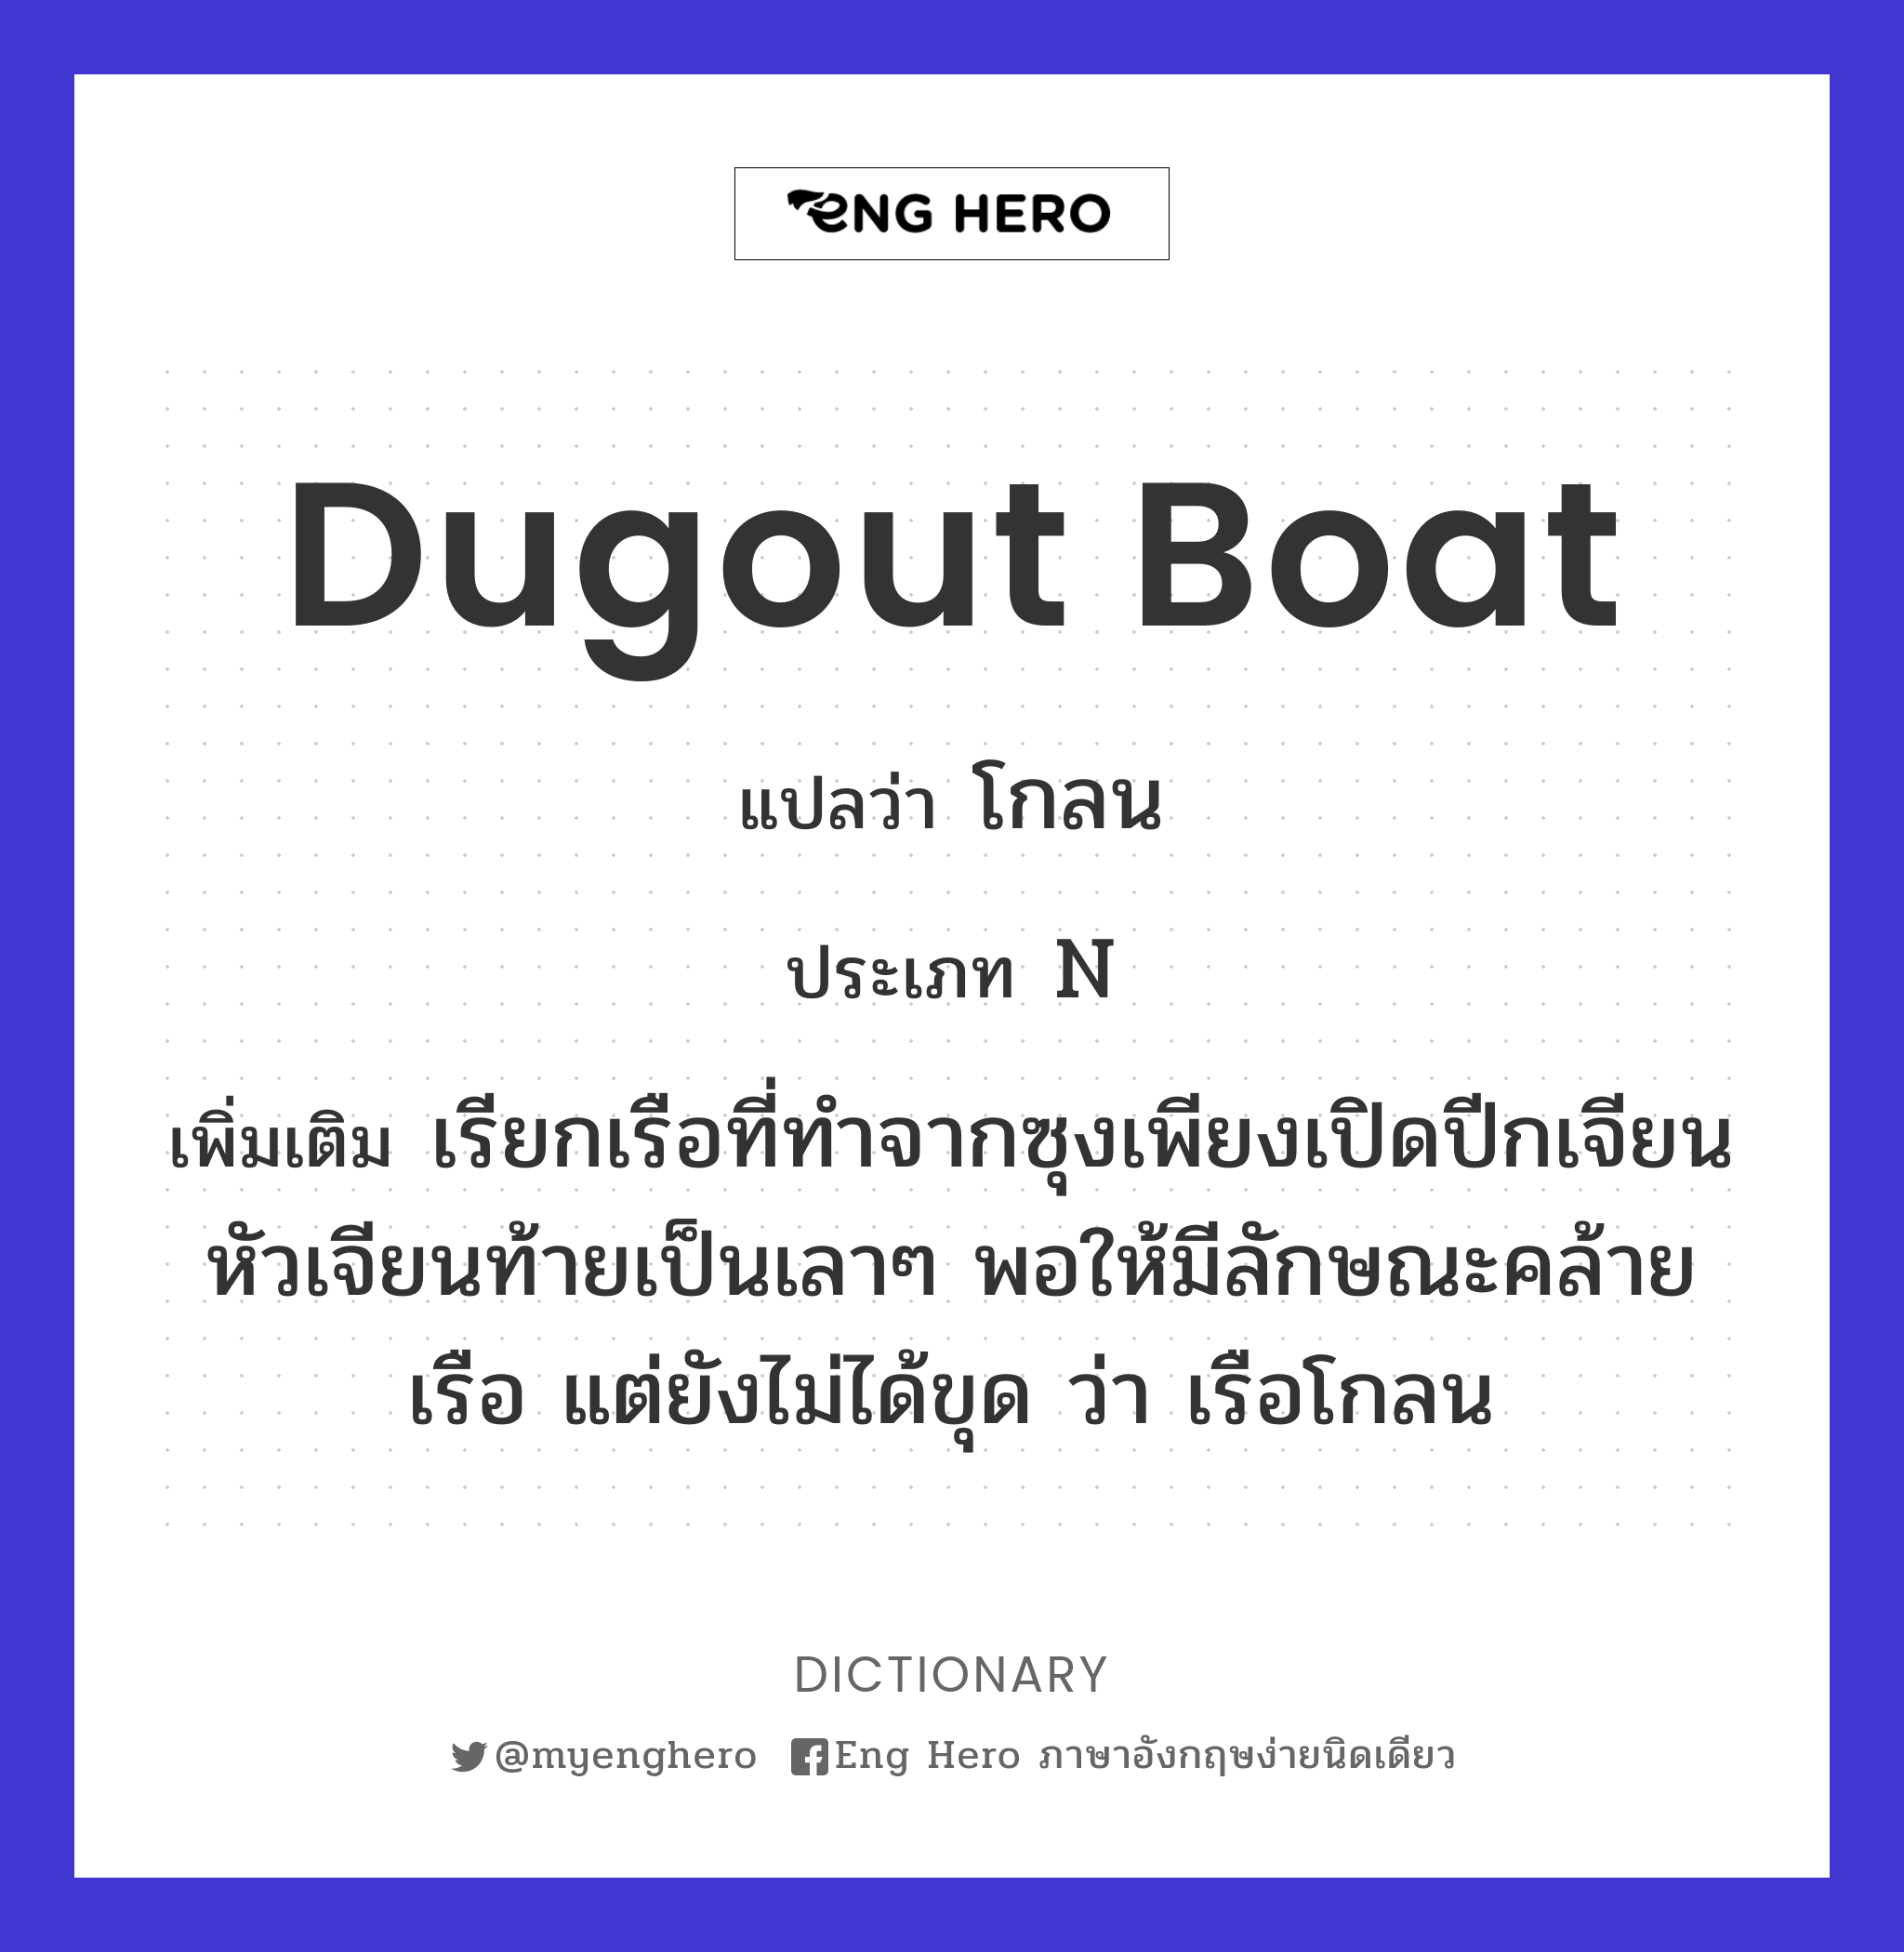 dugout boat